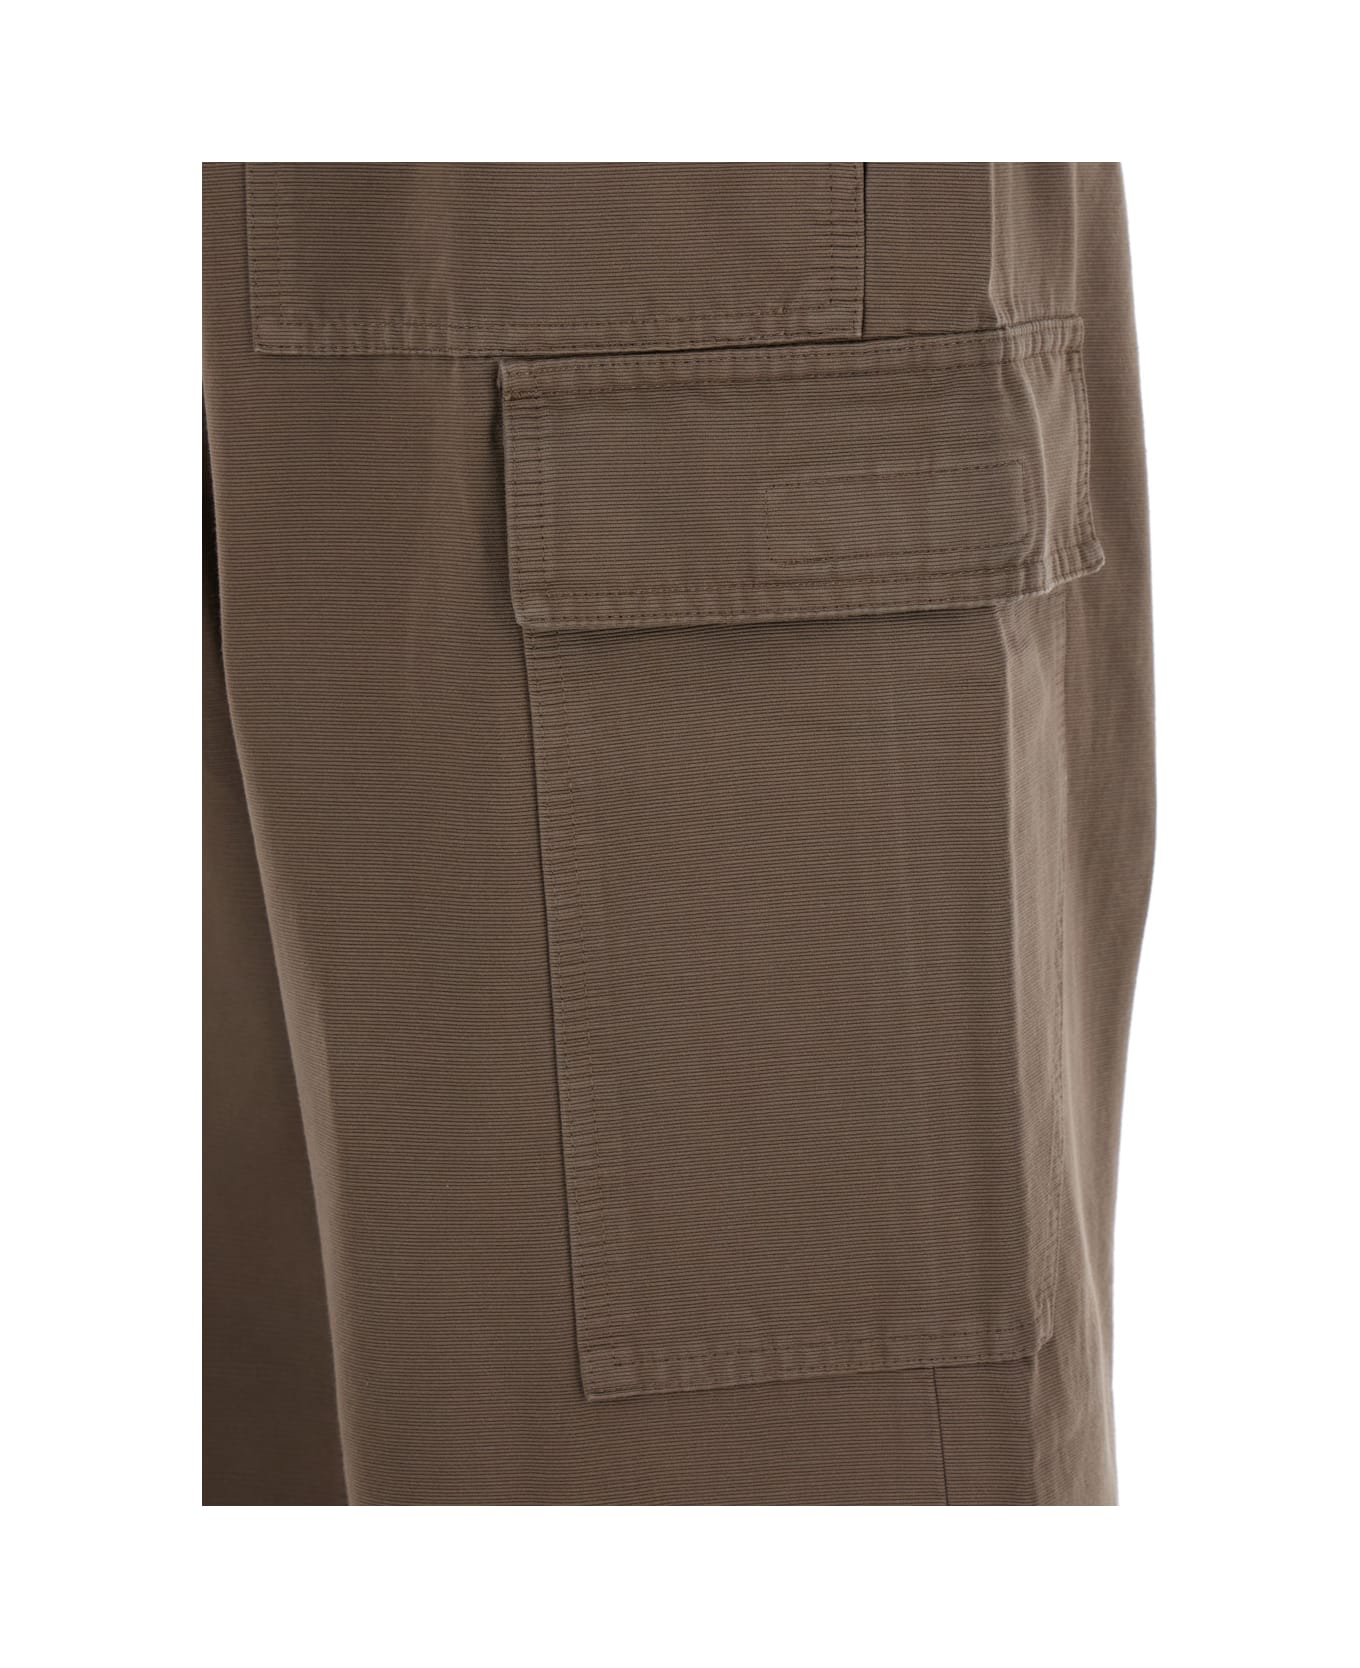 DRKSHDW Cotton Twill Cargo Trousers - Brown ボトムス